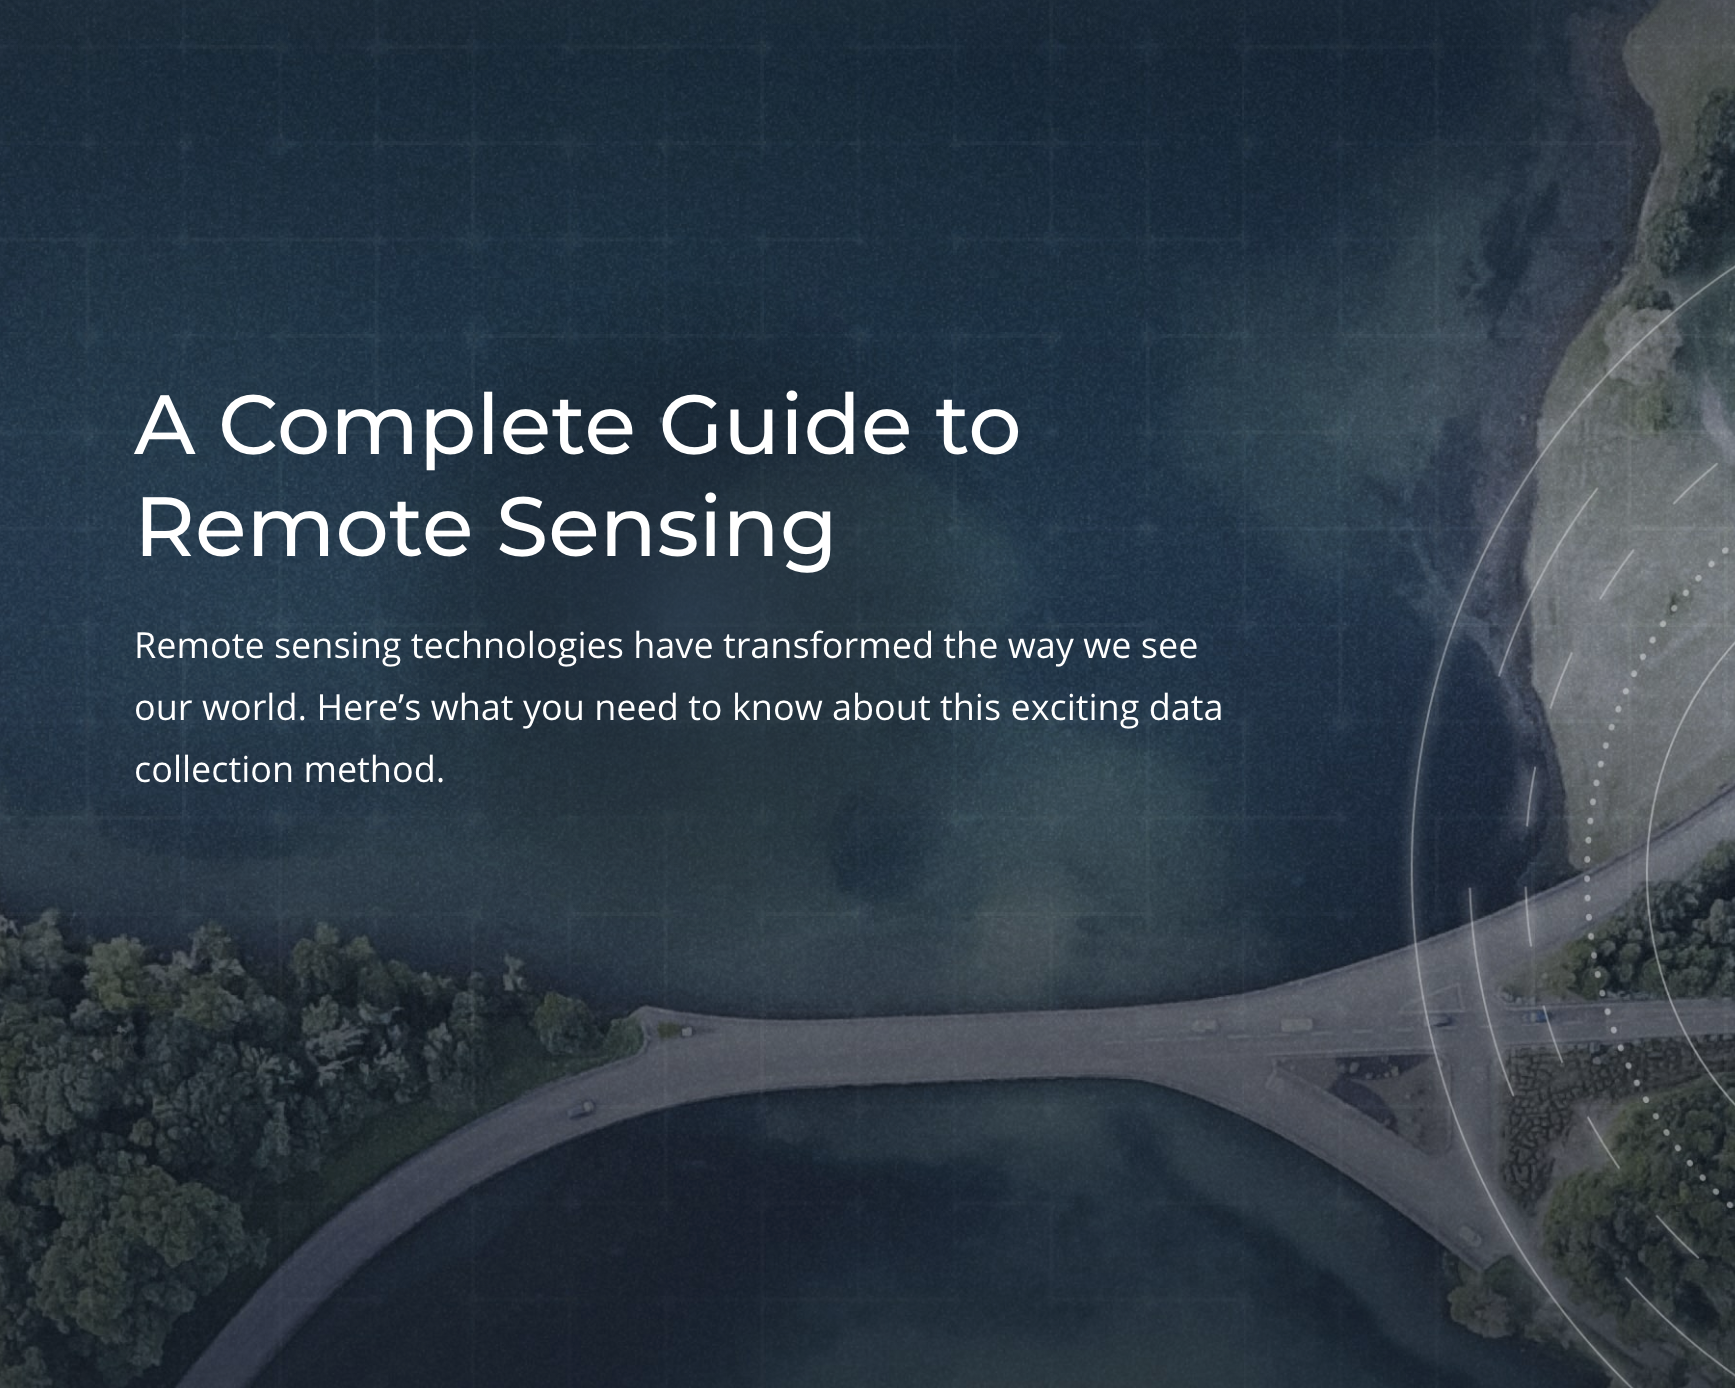 A Complete Guide to Remote Sensing